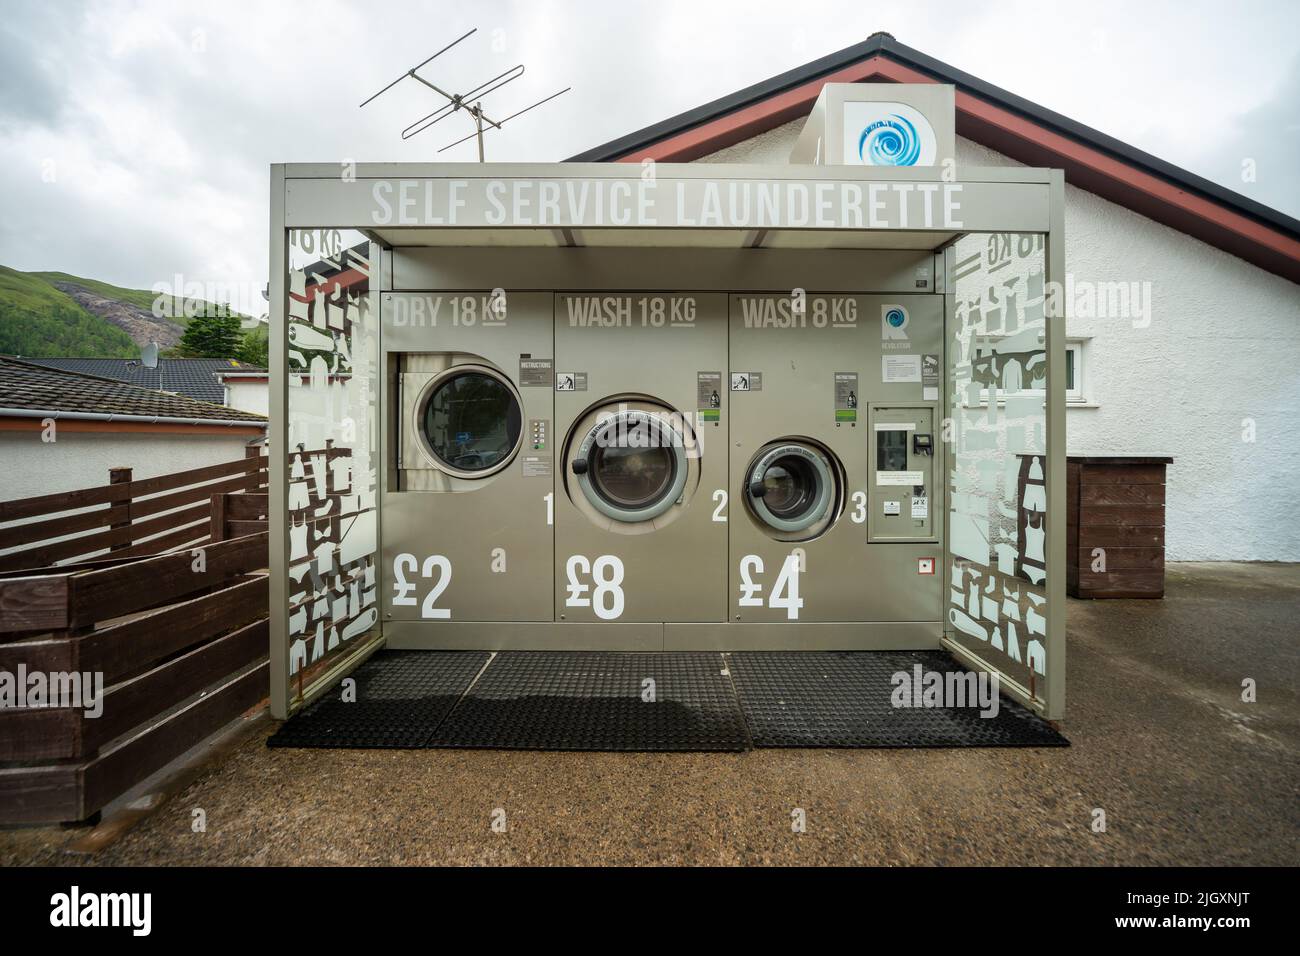 Self service launderette, The Green Welly Stop, Tyndrum, Scotland, UK Stock Photo